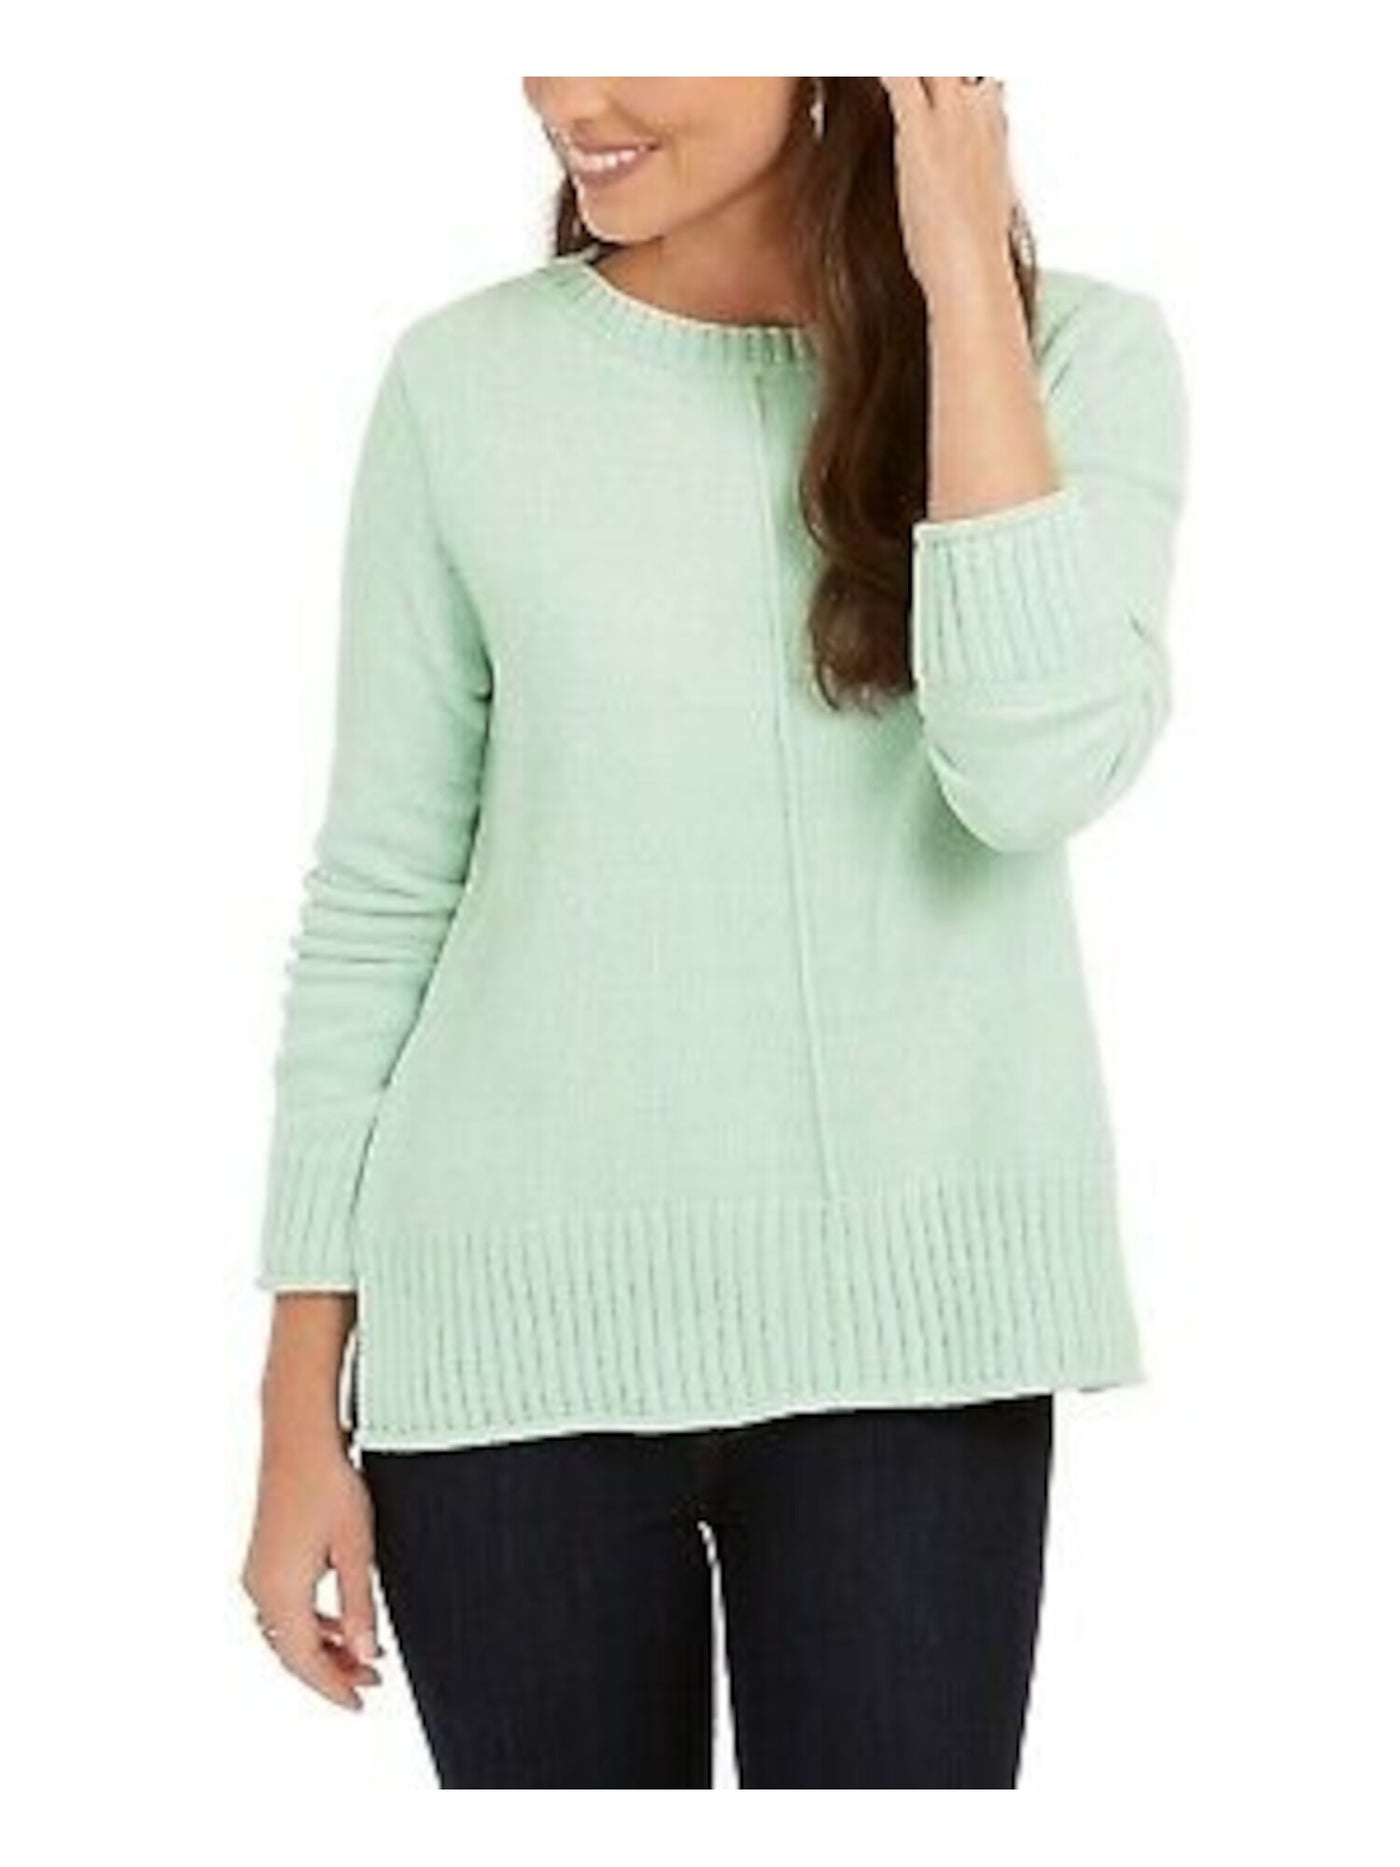 STYLE & COMPANY Womens Green Textured Ribbed 3/4 Sleeve Crew Neck Sweater Petites PP